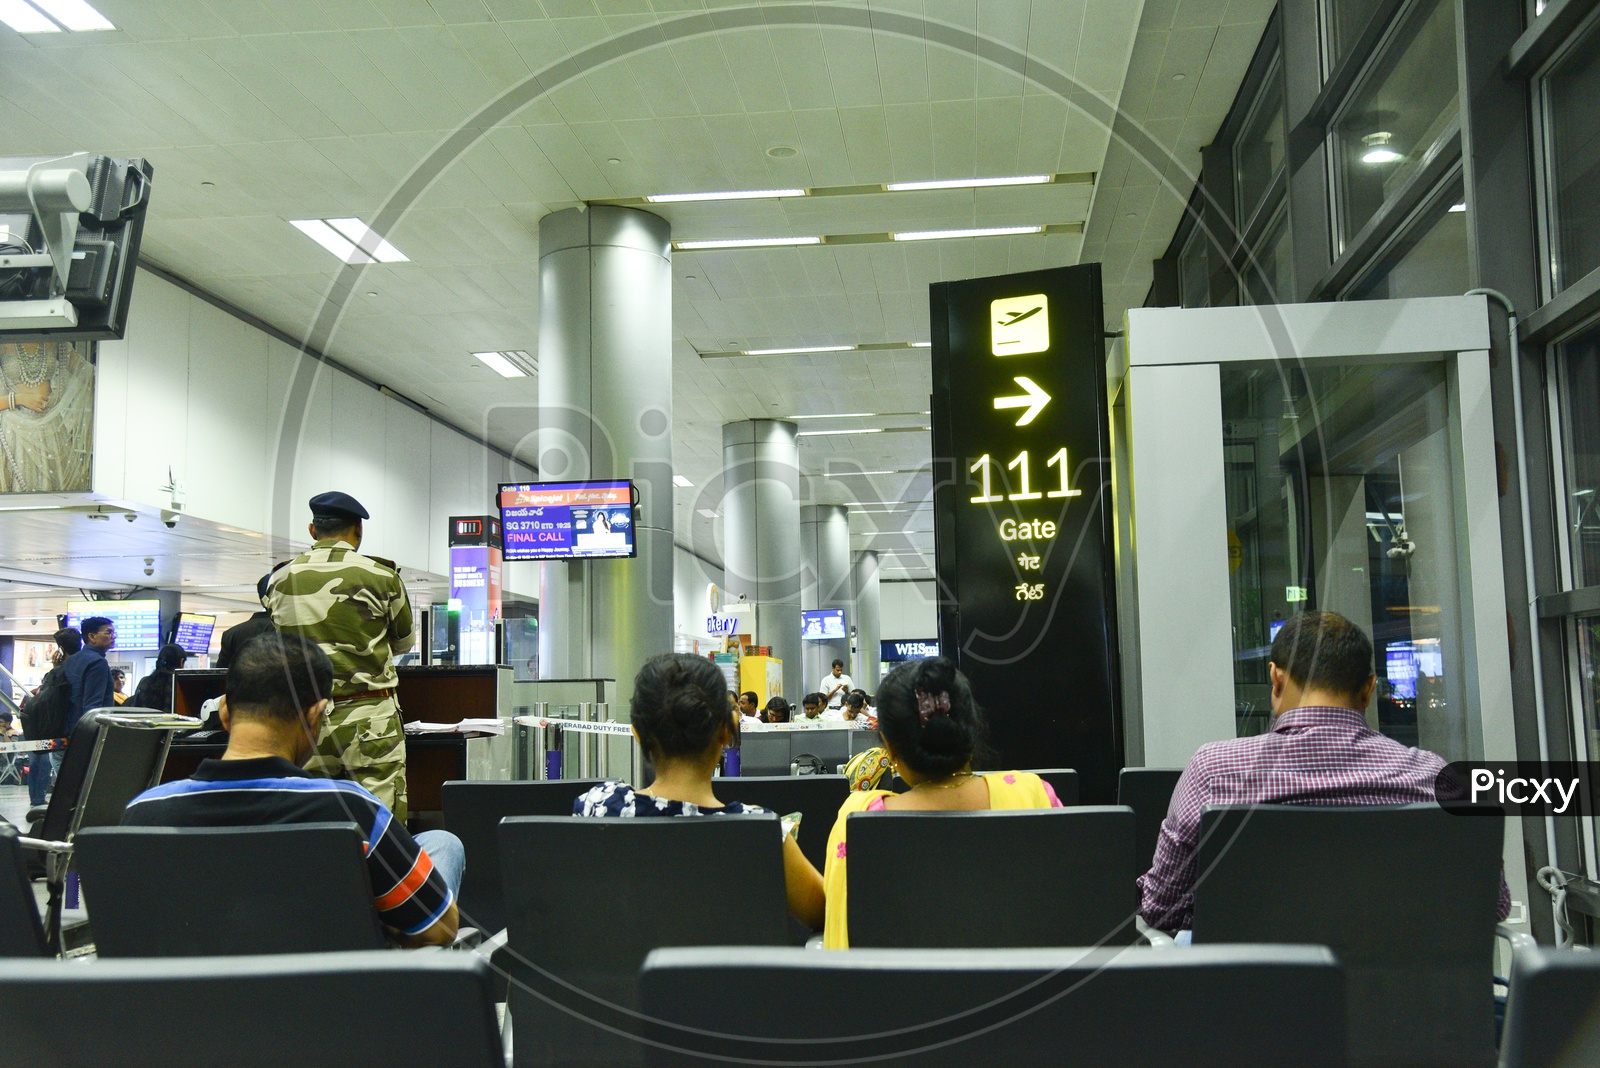 Airport Waiting Lounge  With Passengers Sitting  in  Chairs And Departure Flights  Display Screens